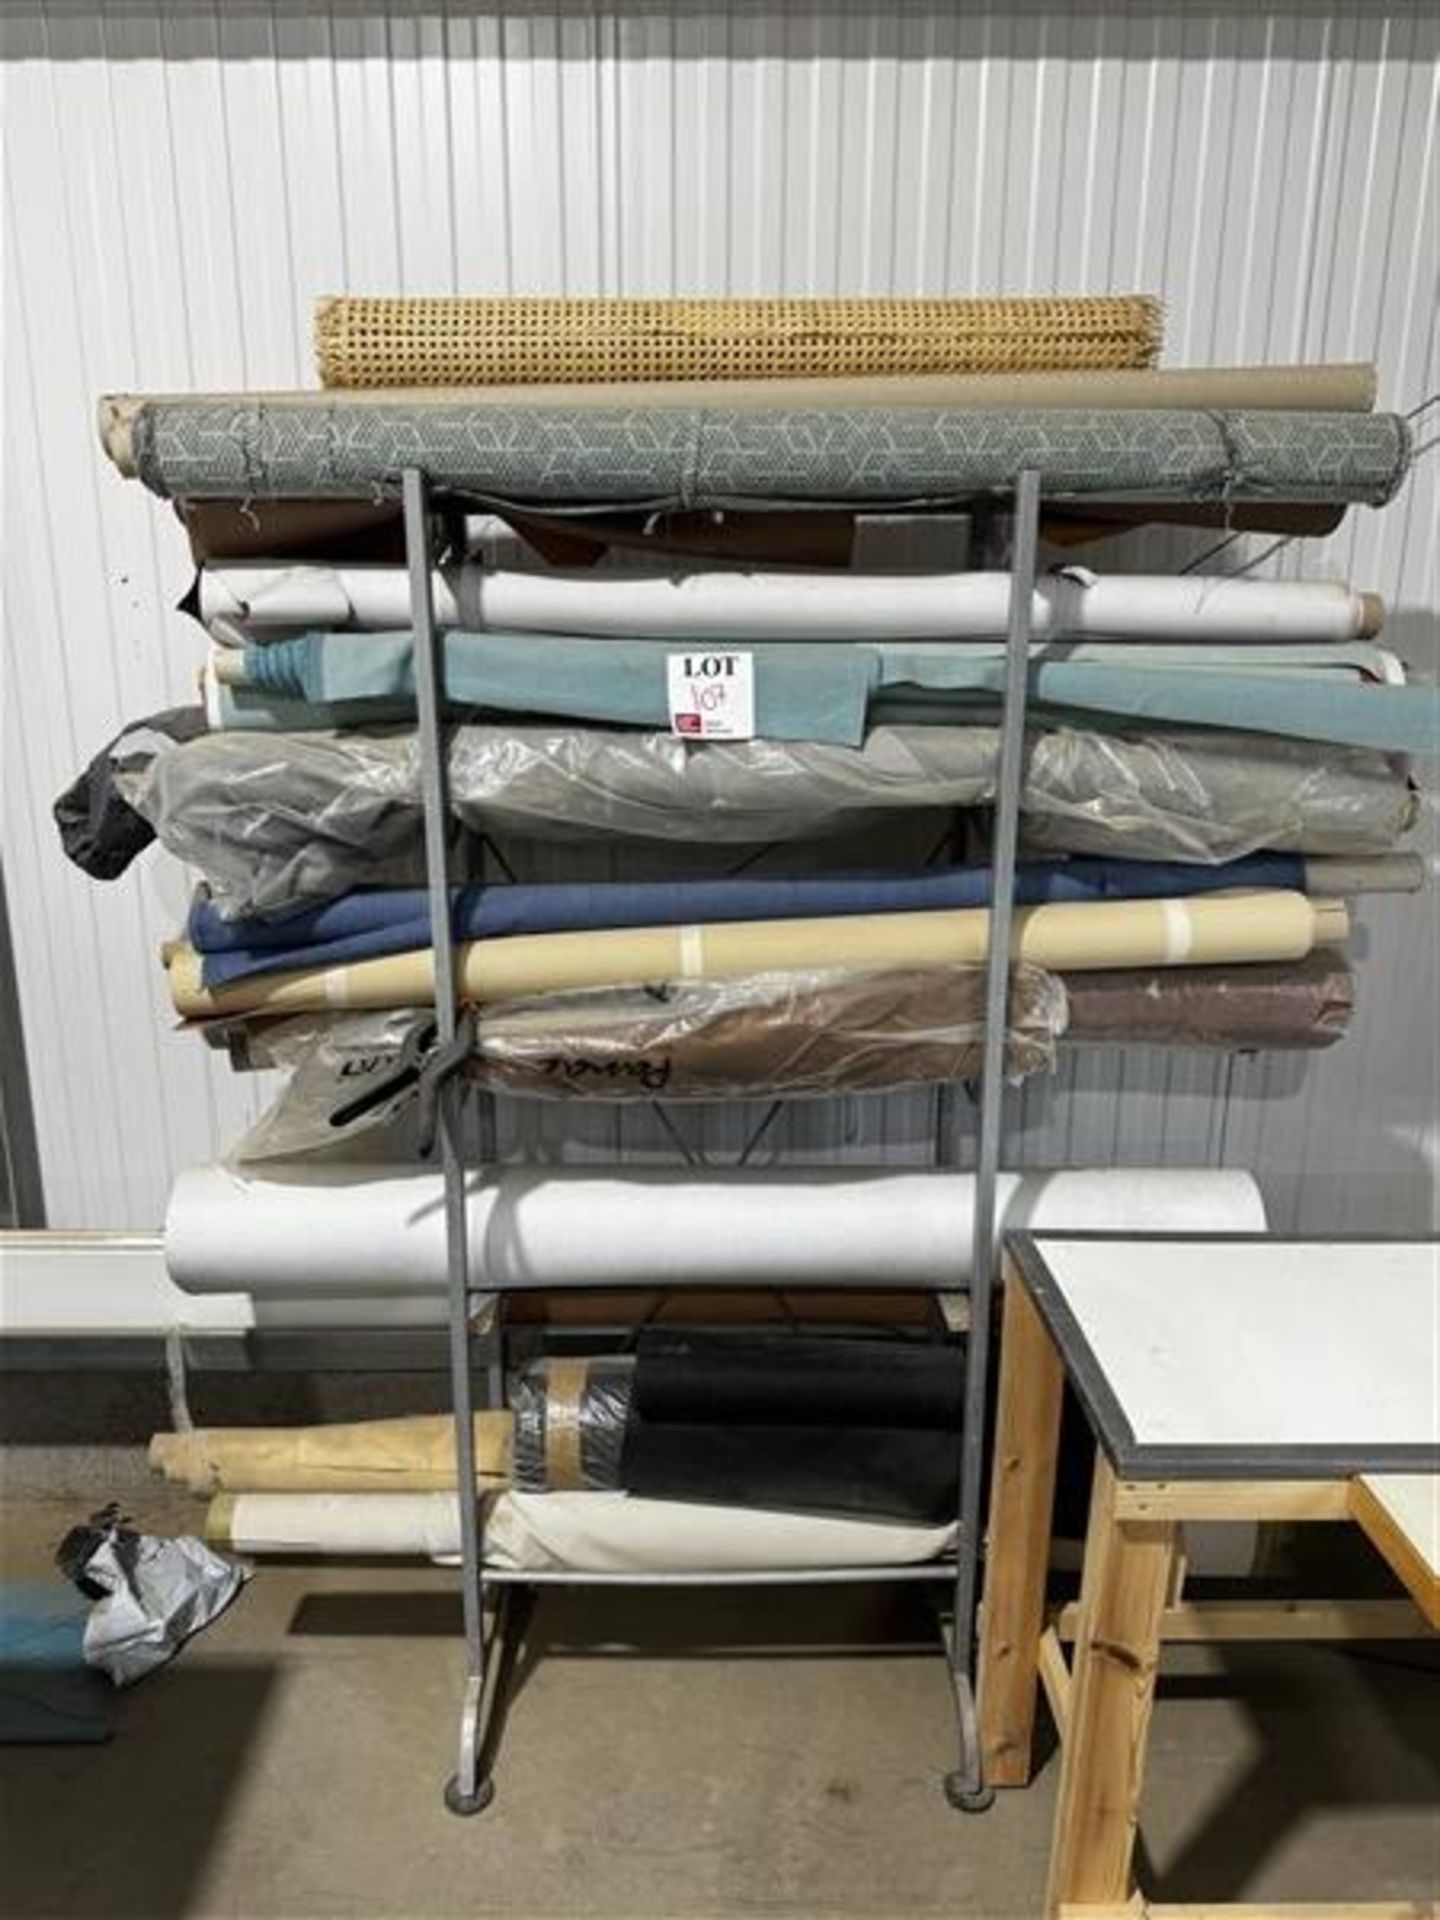 Assorted textiles and rack